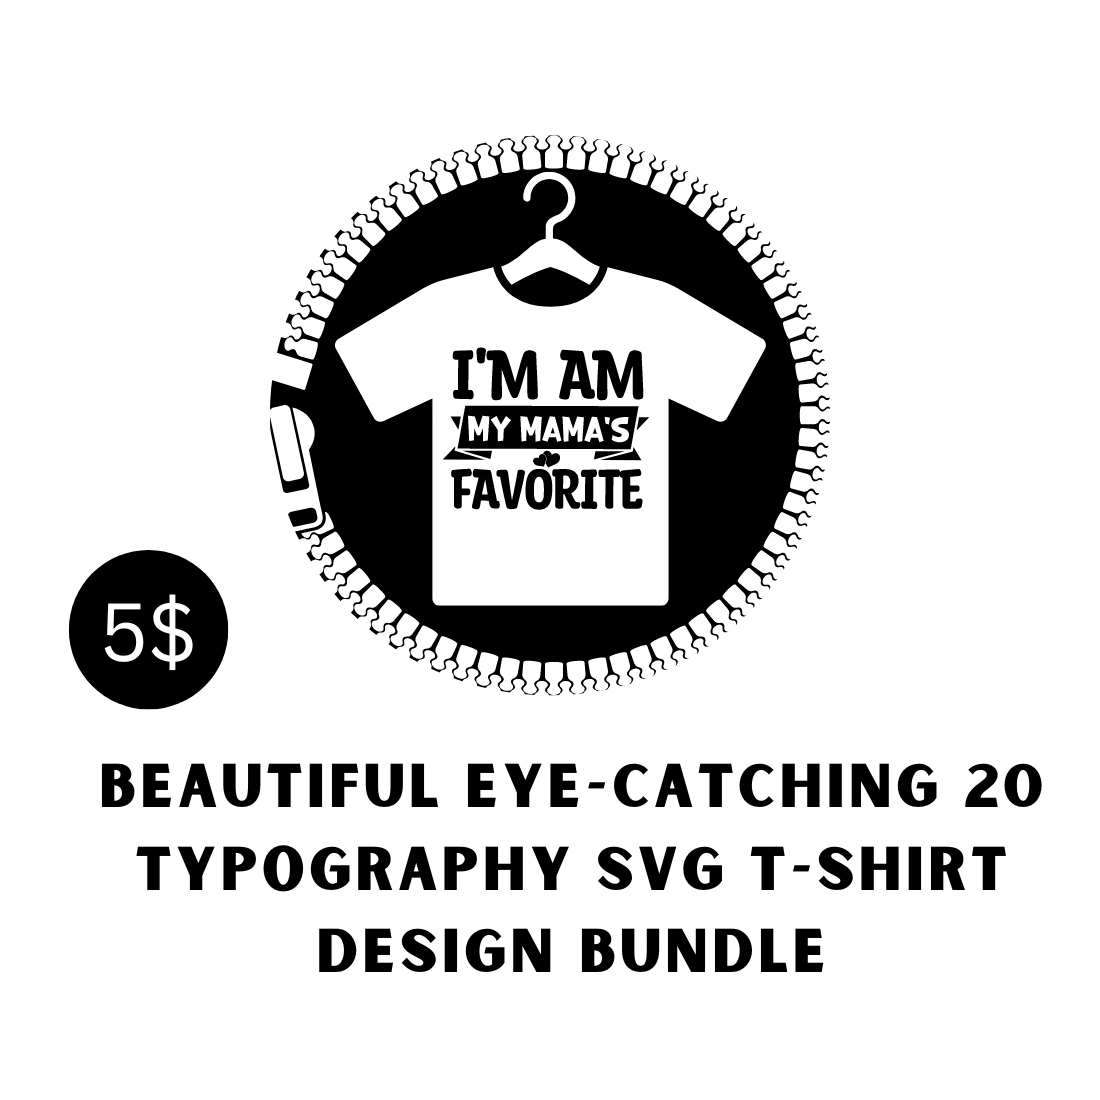 T-shirt Typography SVG Design cover image.